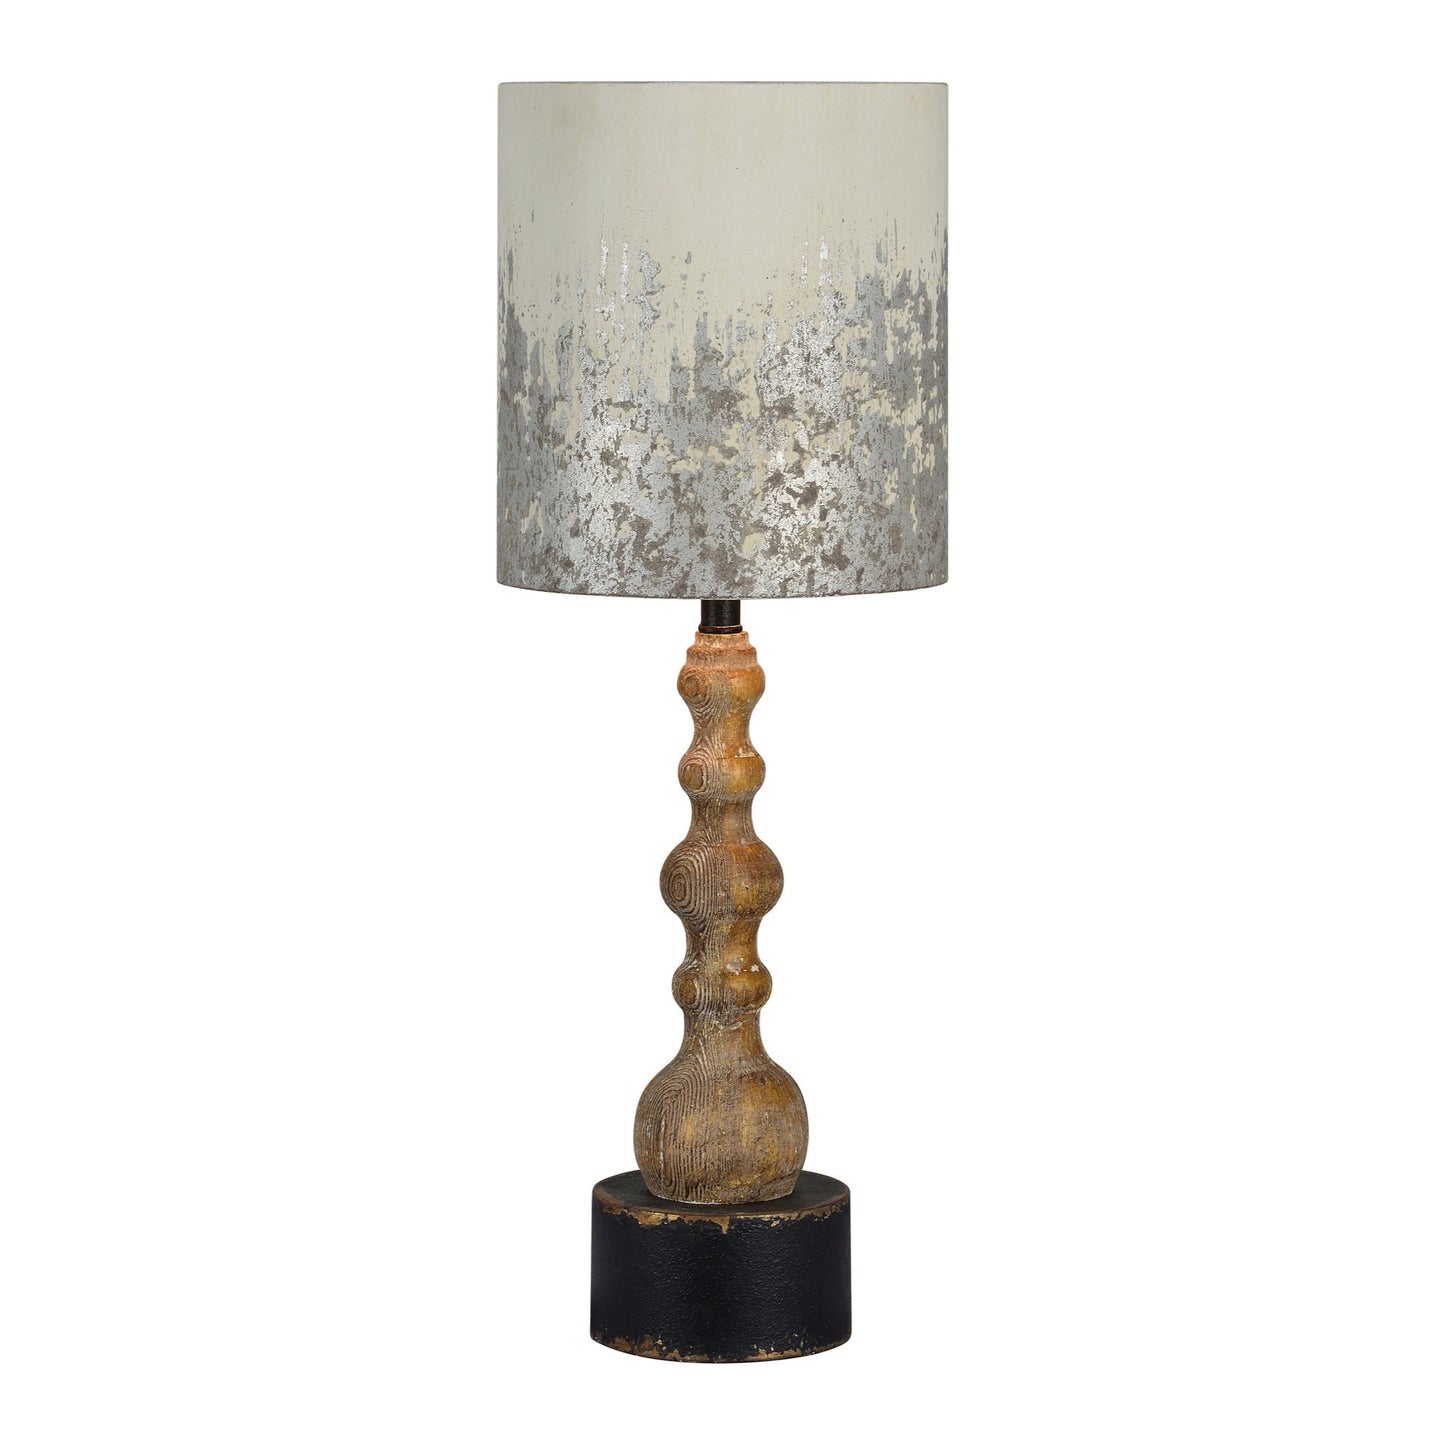 Wood Table Lamp with White Metallic Shade